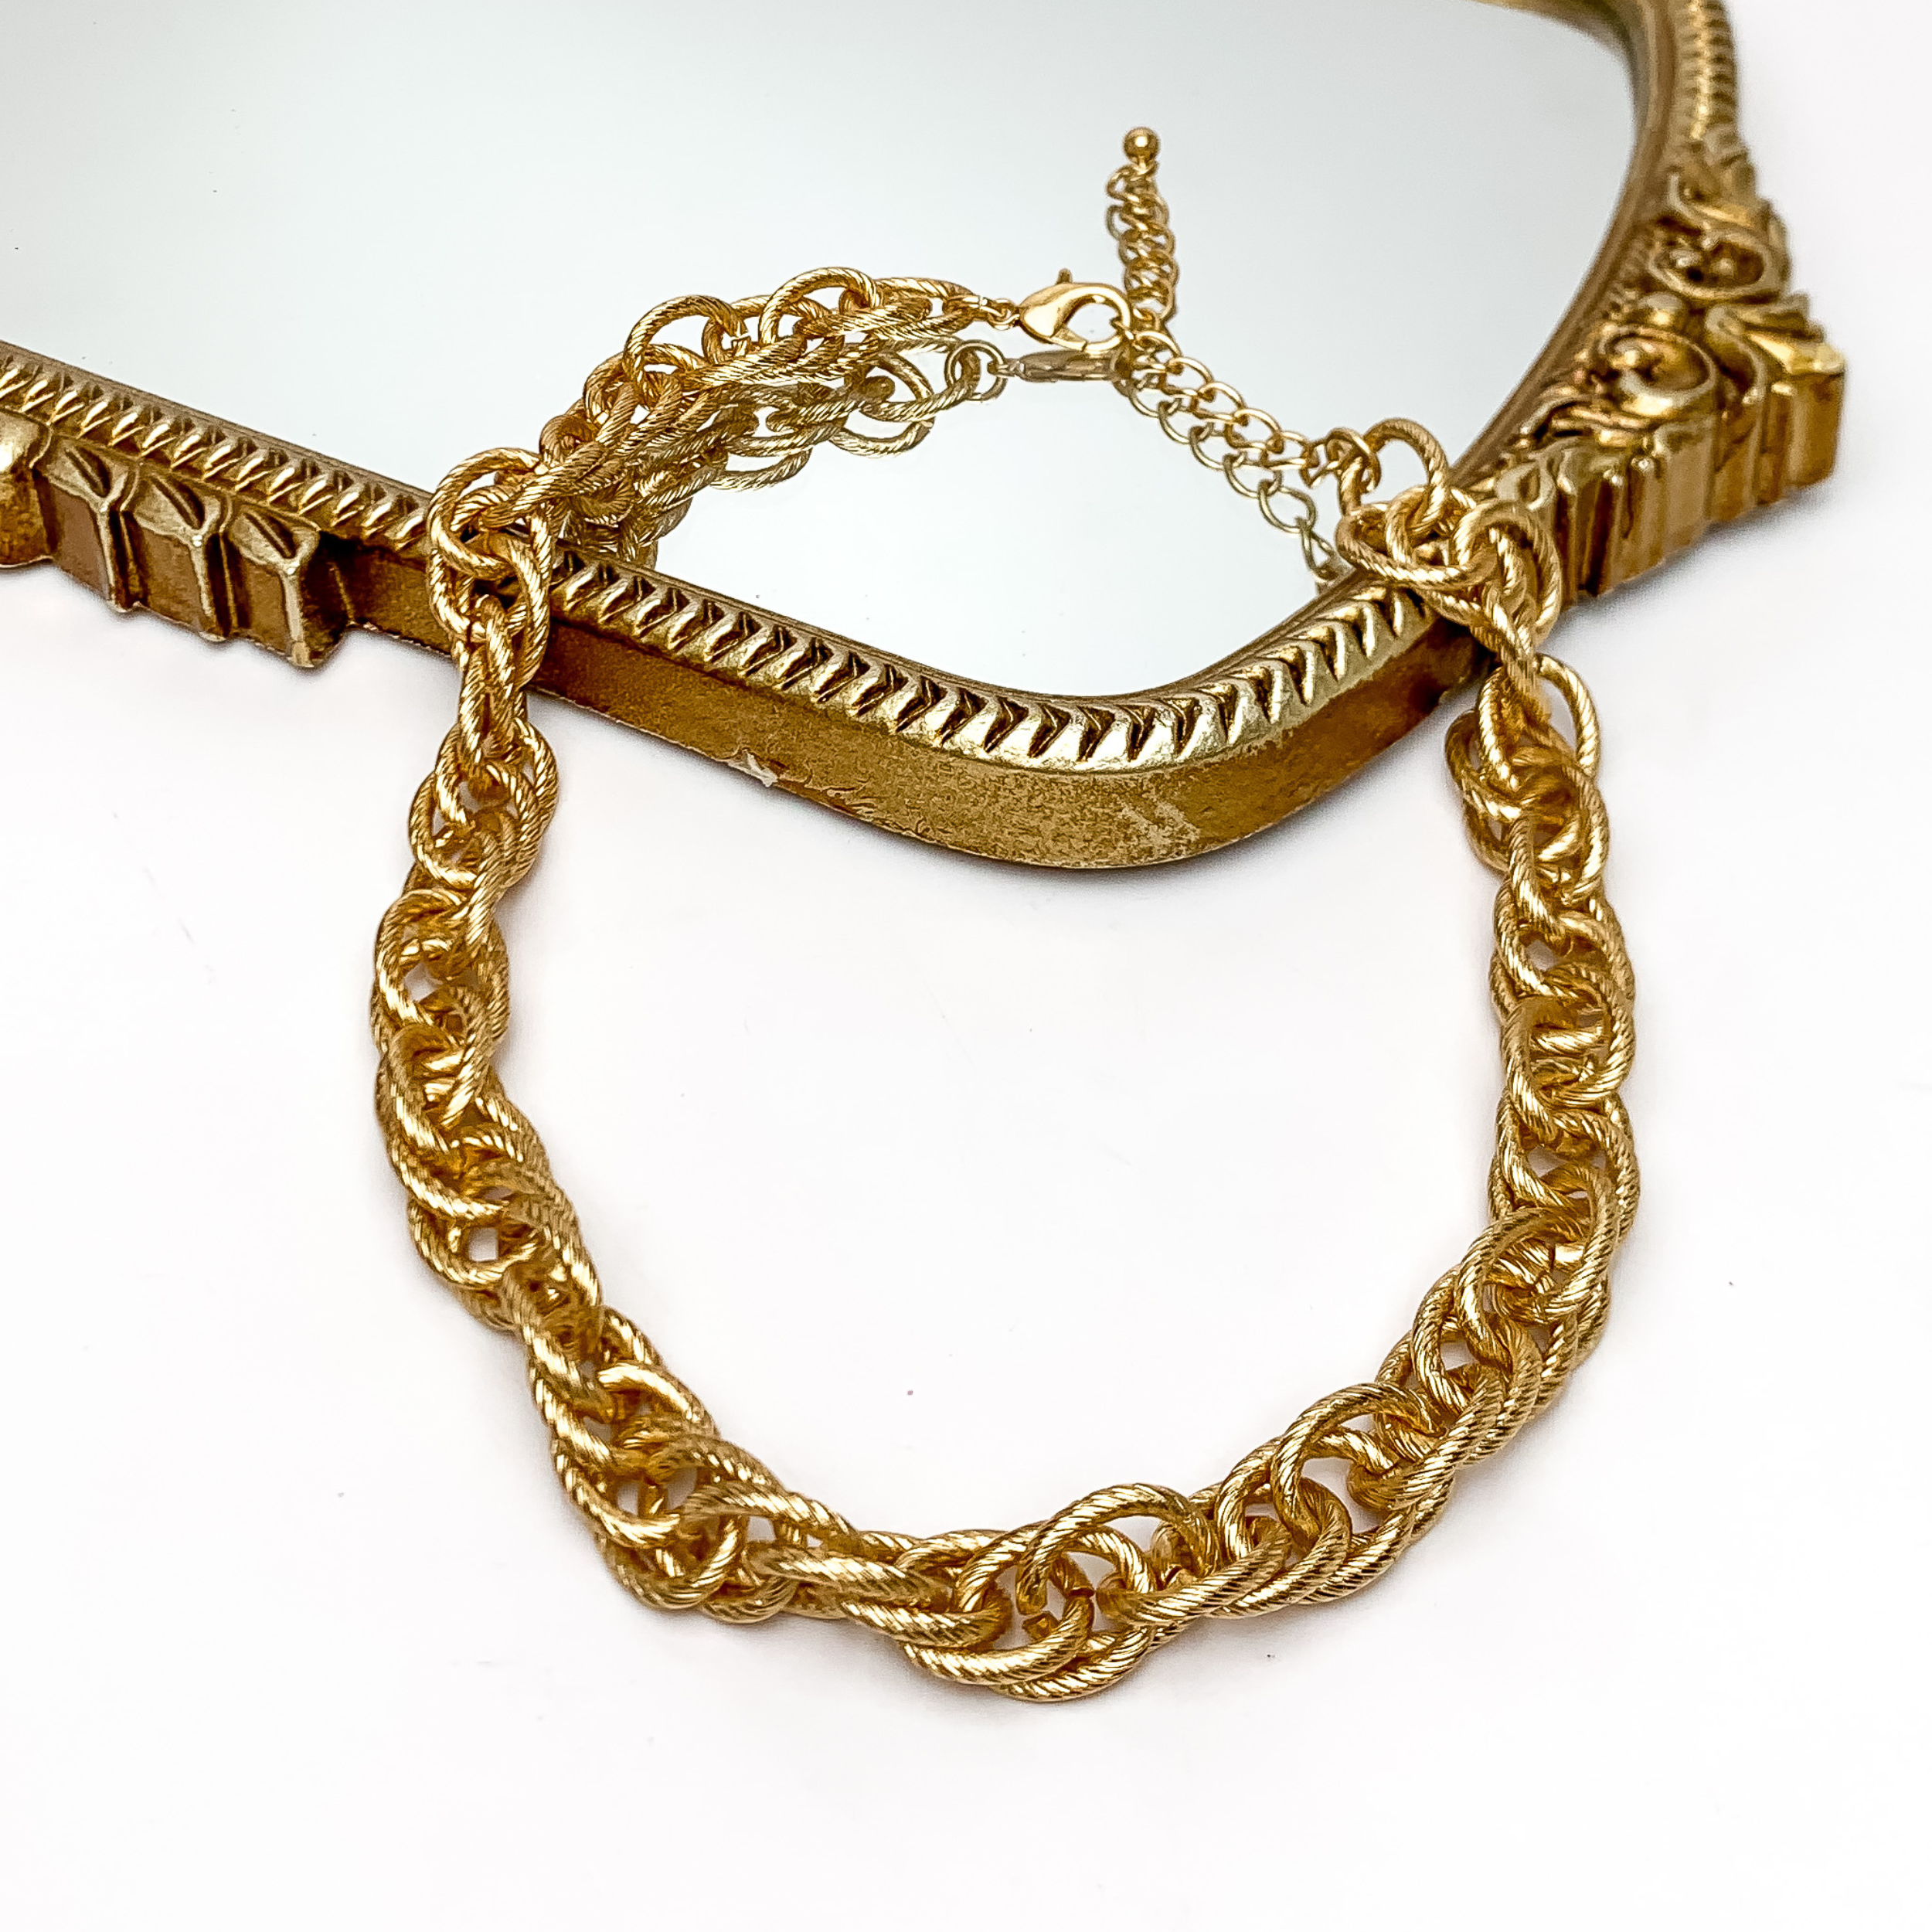 Back To Basics Gold Tone Chain Necklace. Pictured on a white background with part of the necklace laying on a gold frame mirror.